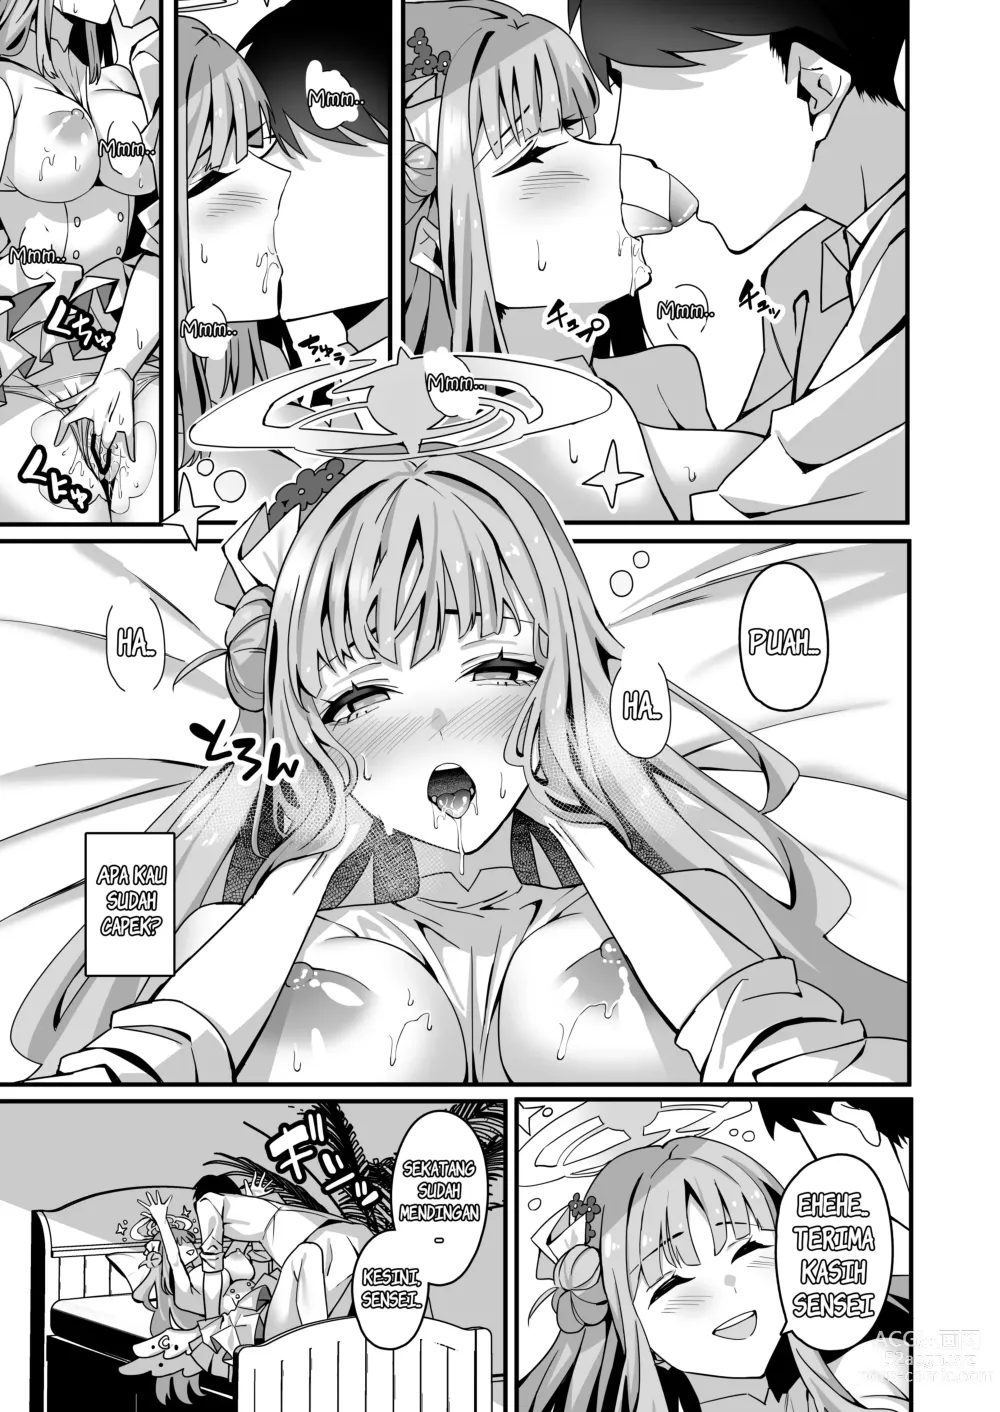 Page 8 of doujinshi Mika to Happy Love Love Sex Shite Haramaseru Hon - A book about happy loving sex with Mika and impregnation.